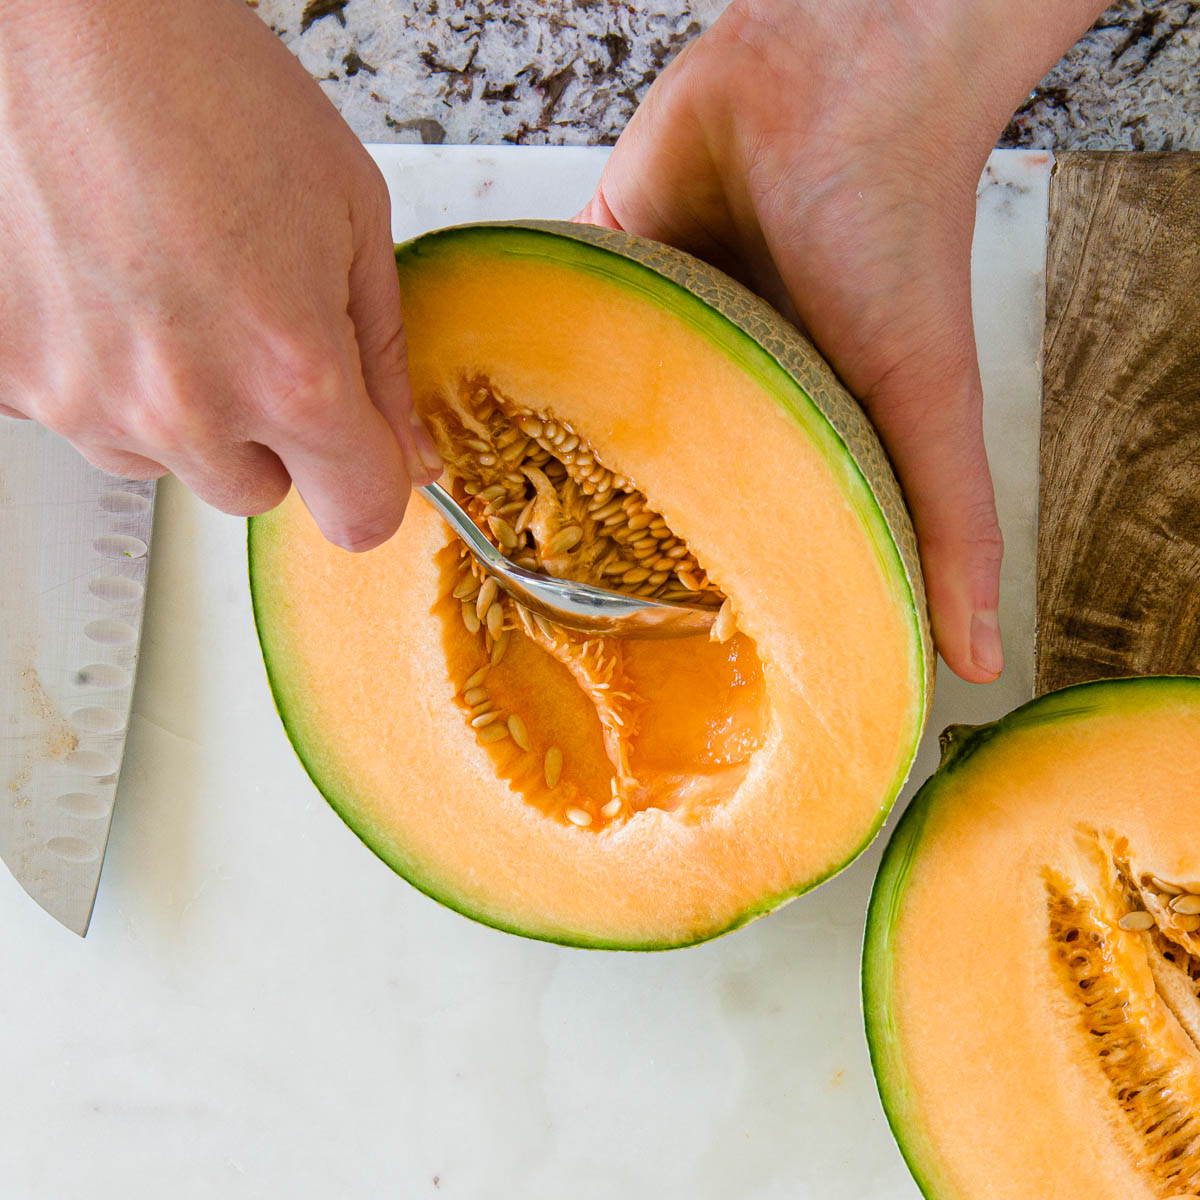 scooping out the seeds from halves of a cantaloupe to show how to cut a cantaloupe.